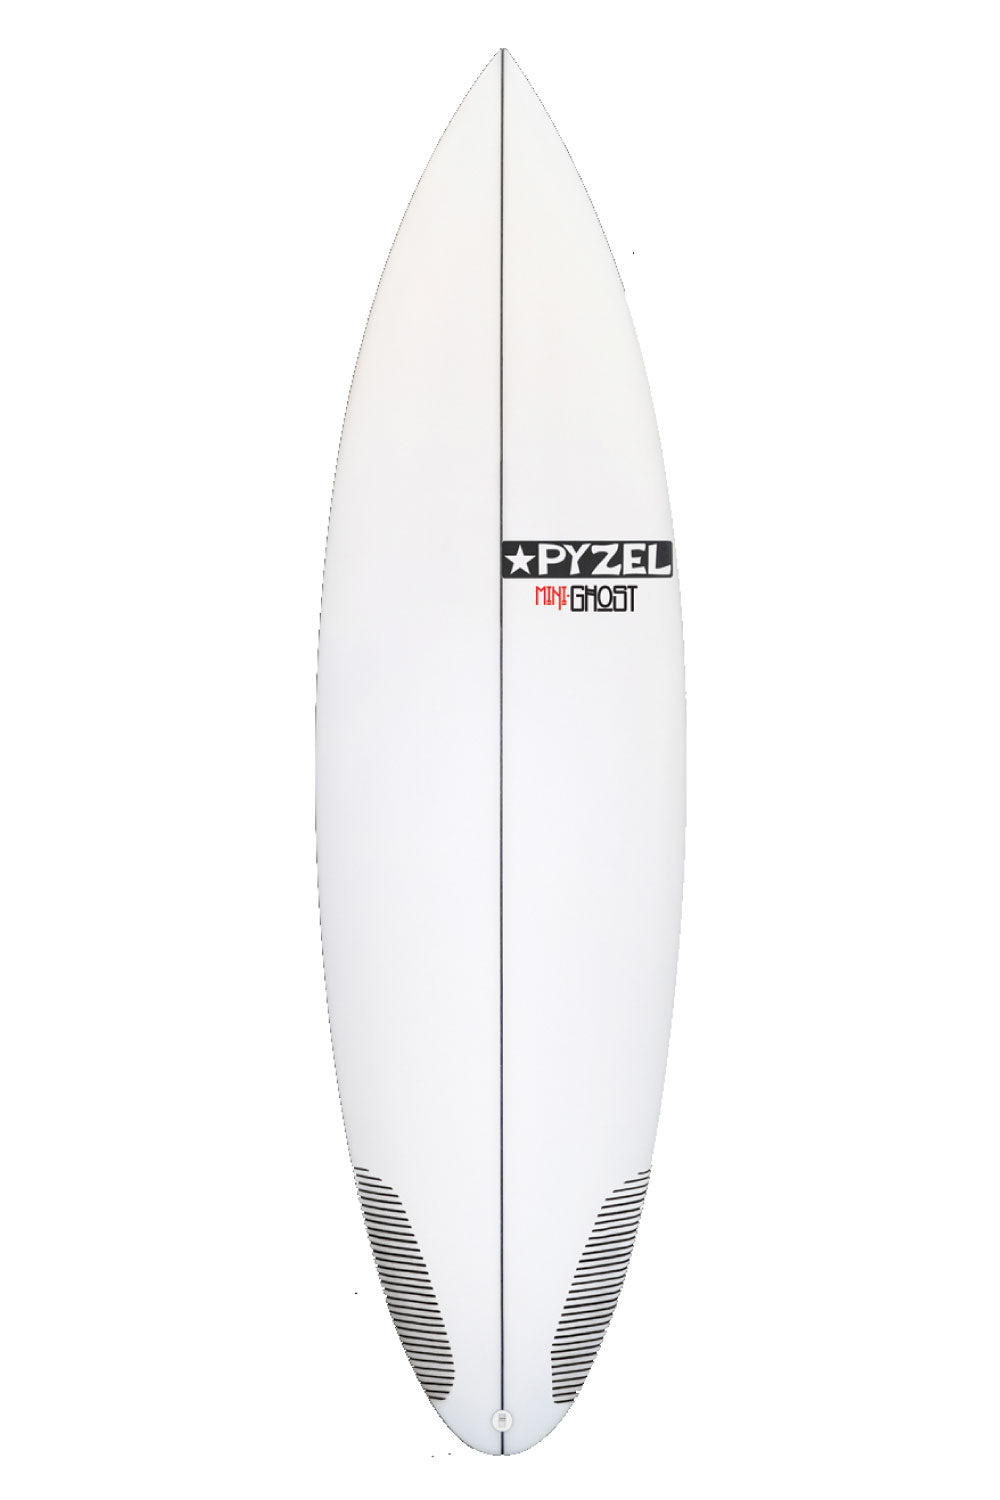 Pyzel Mini Ghost Surfboard (Round Tail)